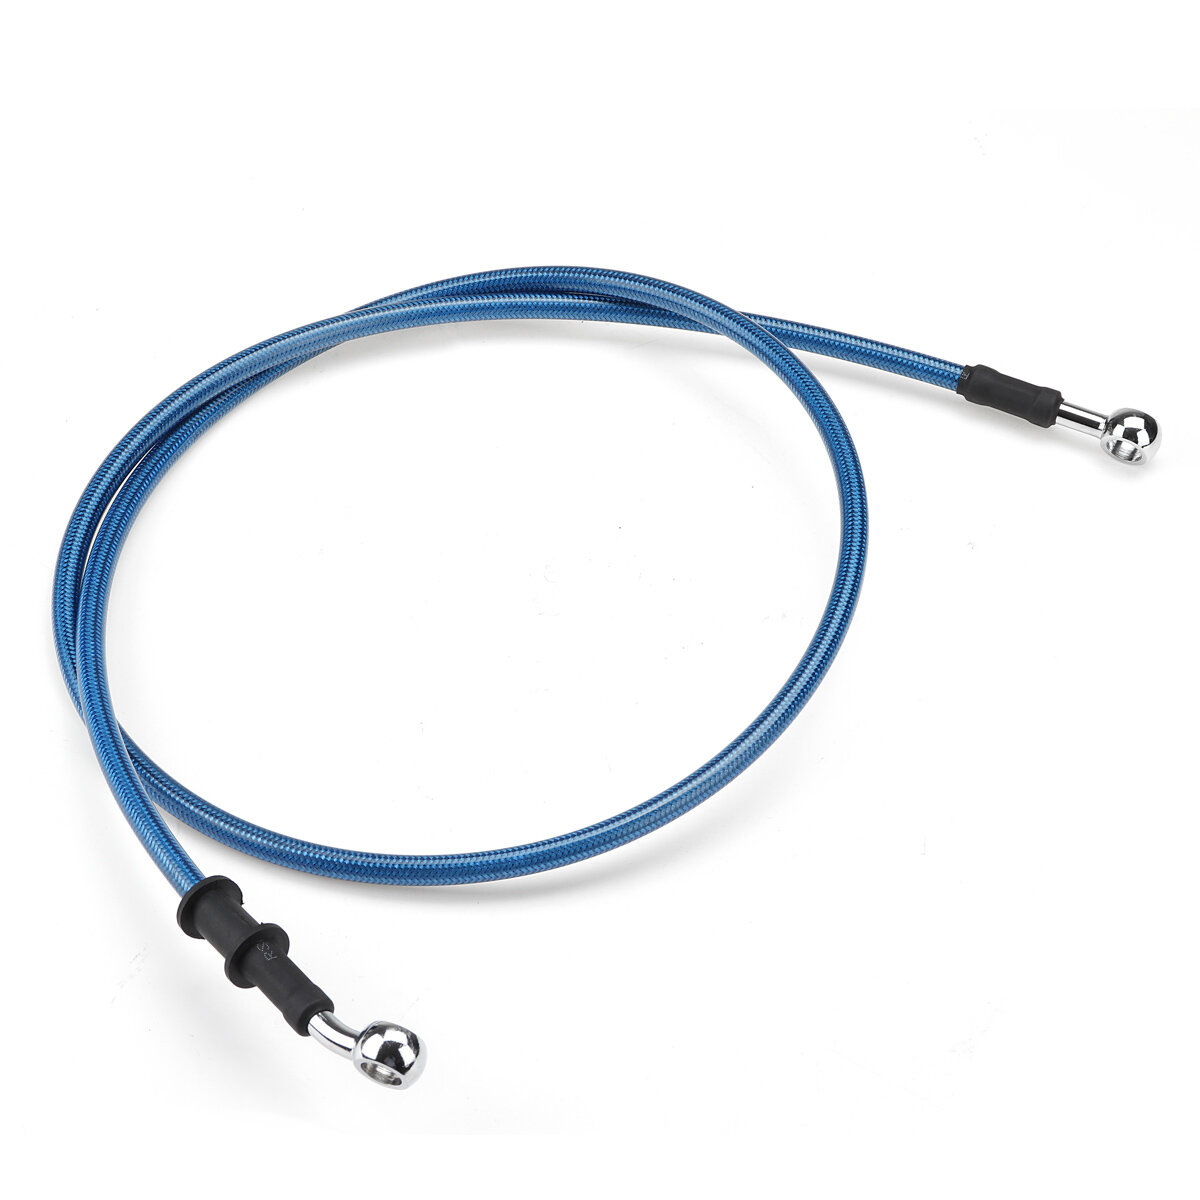 300mm-2200mm Motorcycle Braided Brake Clutch Oil Hose Line Pipe Cable Universal Blue